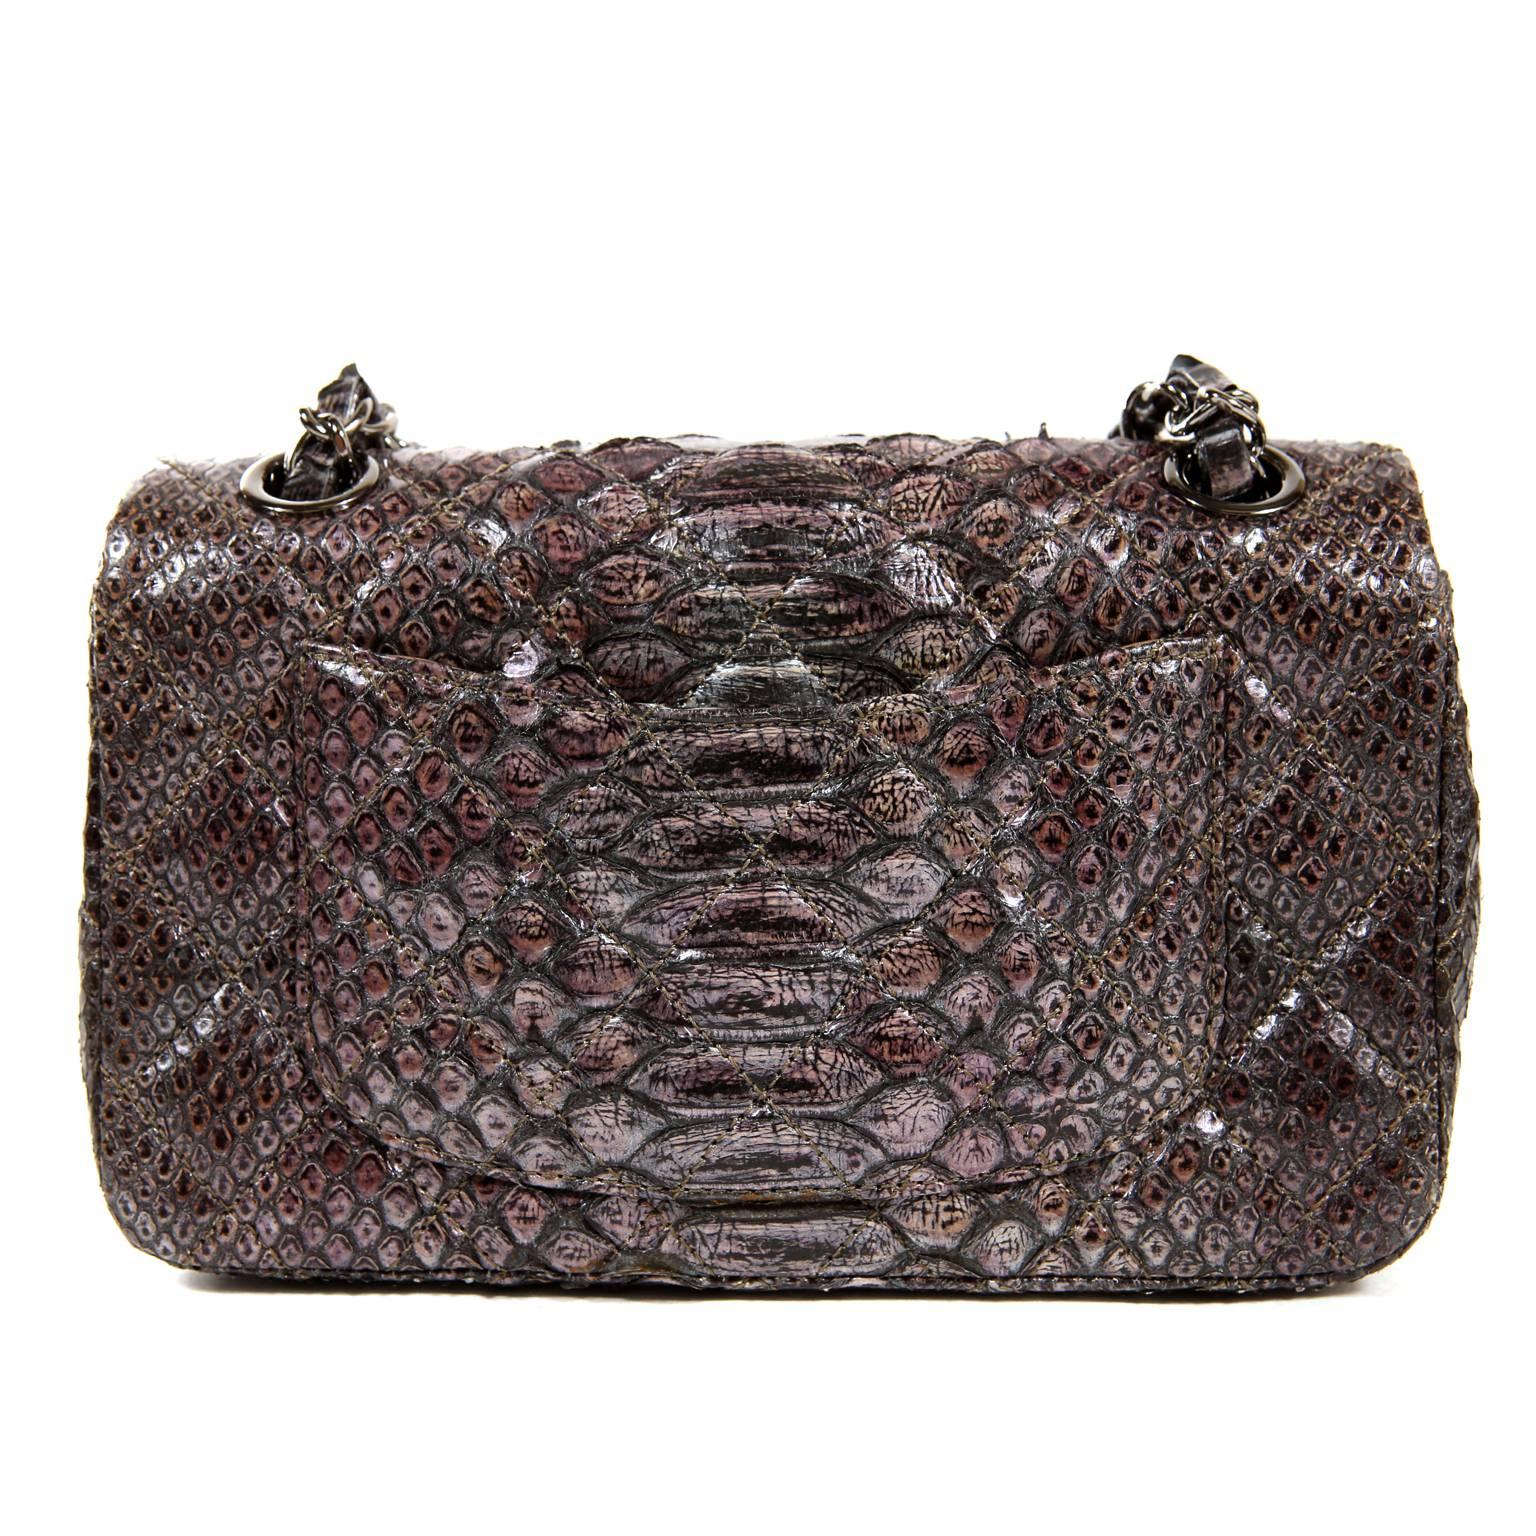 Chanel Python Small Flap Bag is exquisite.  Pristine and never carried, this exotic Chanel is a brilliant addition to any collection.
Silver and lilac hued python skin is subtly quilted in signature Chanel diamond pattern.  Oversized gold crystal